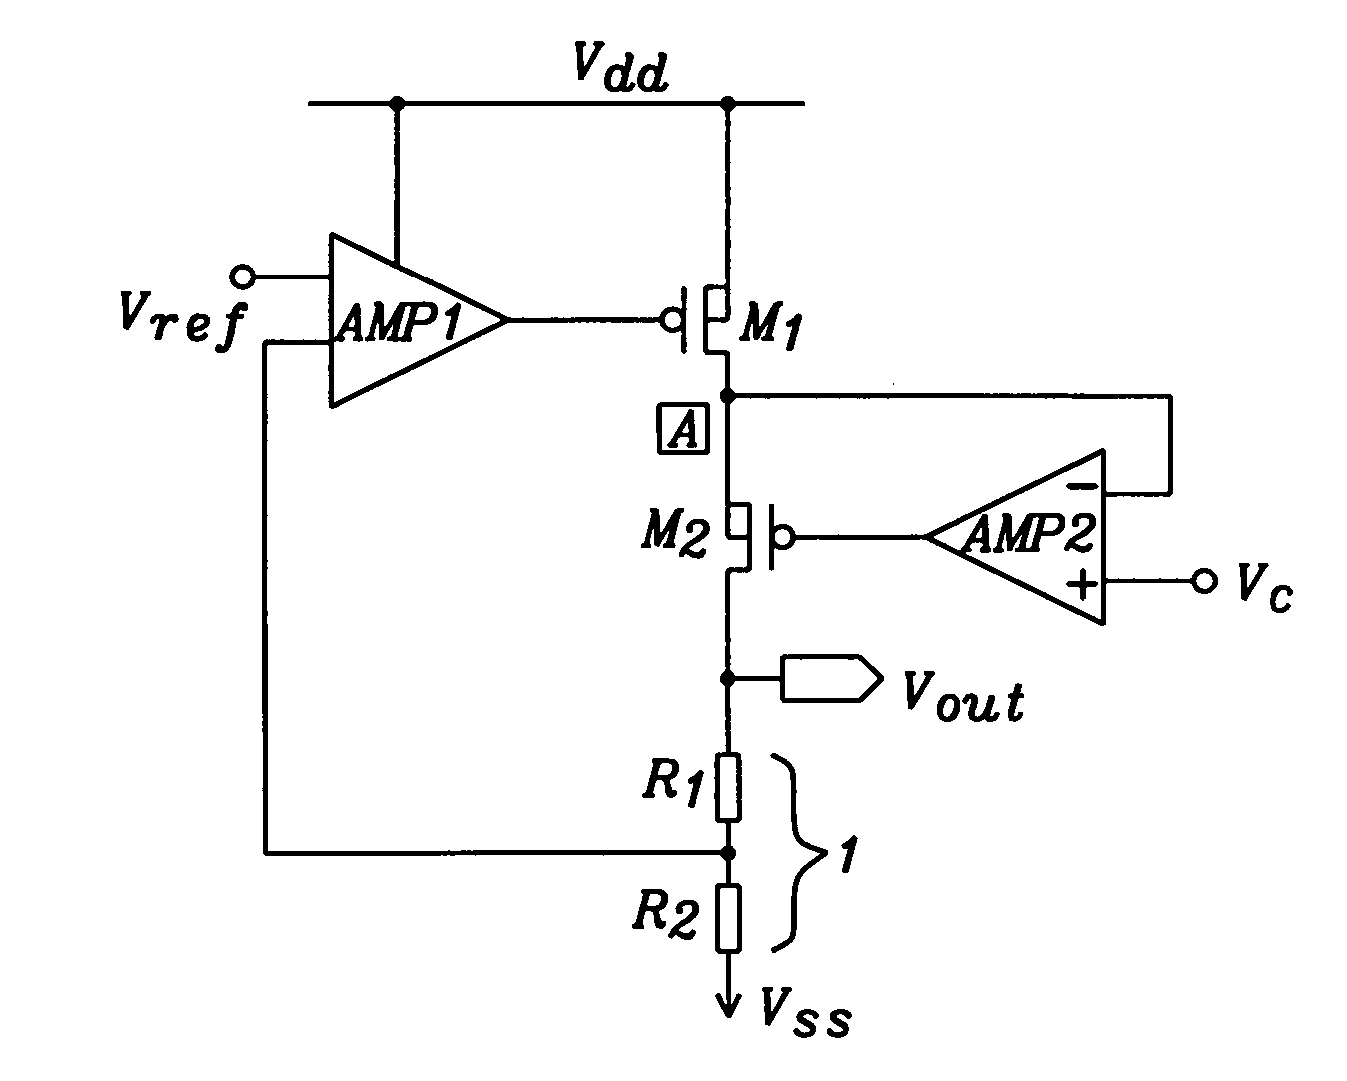 Voltage regulator output stage with low voltage MOS devices